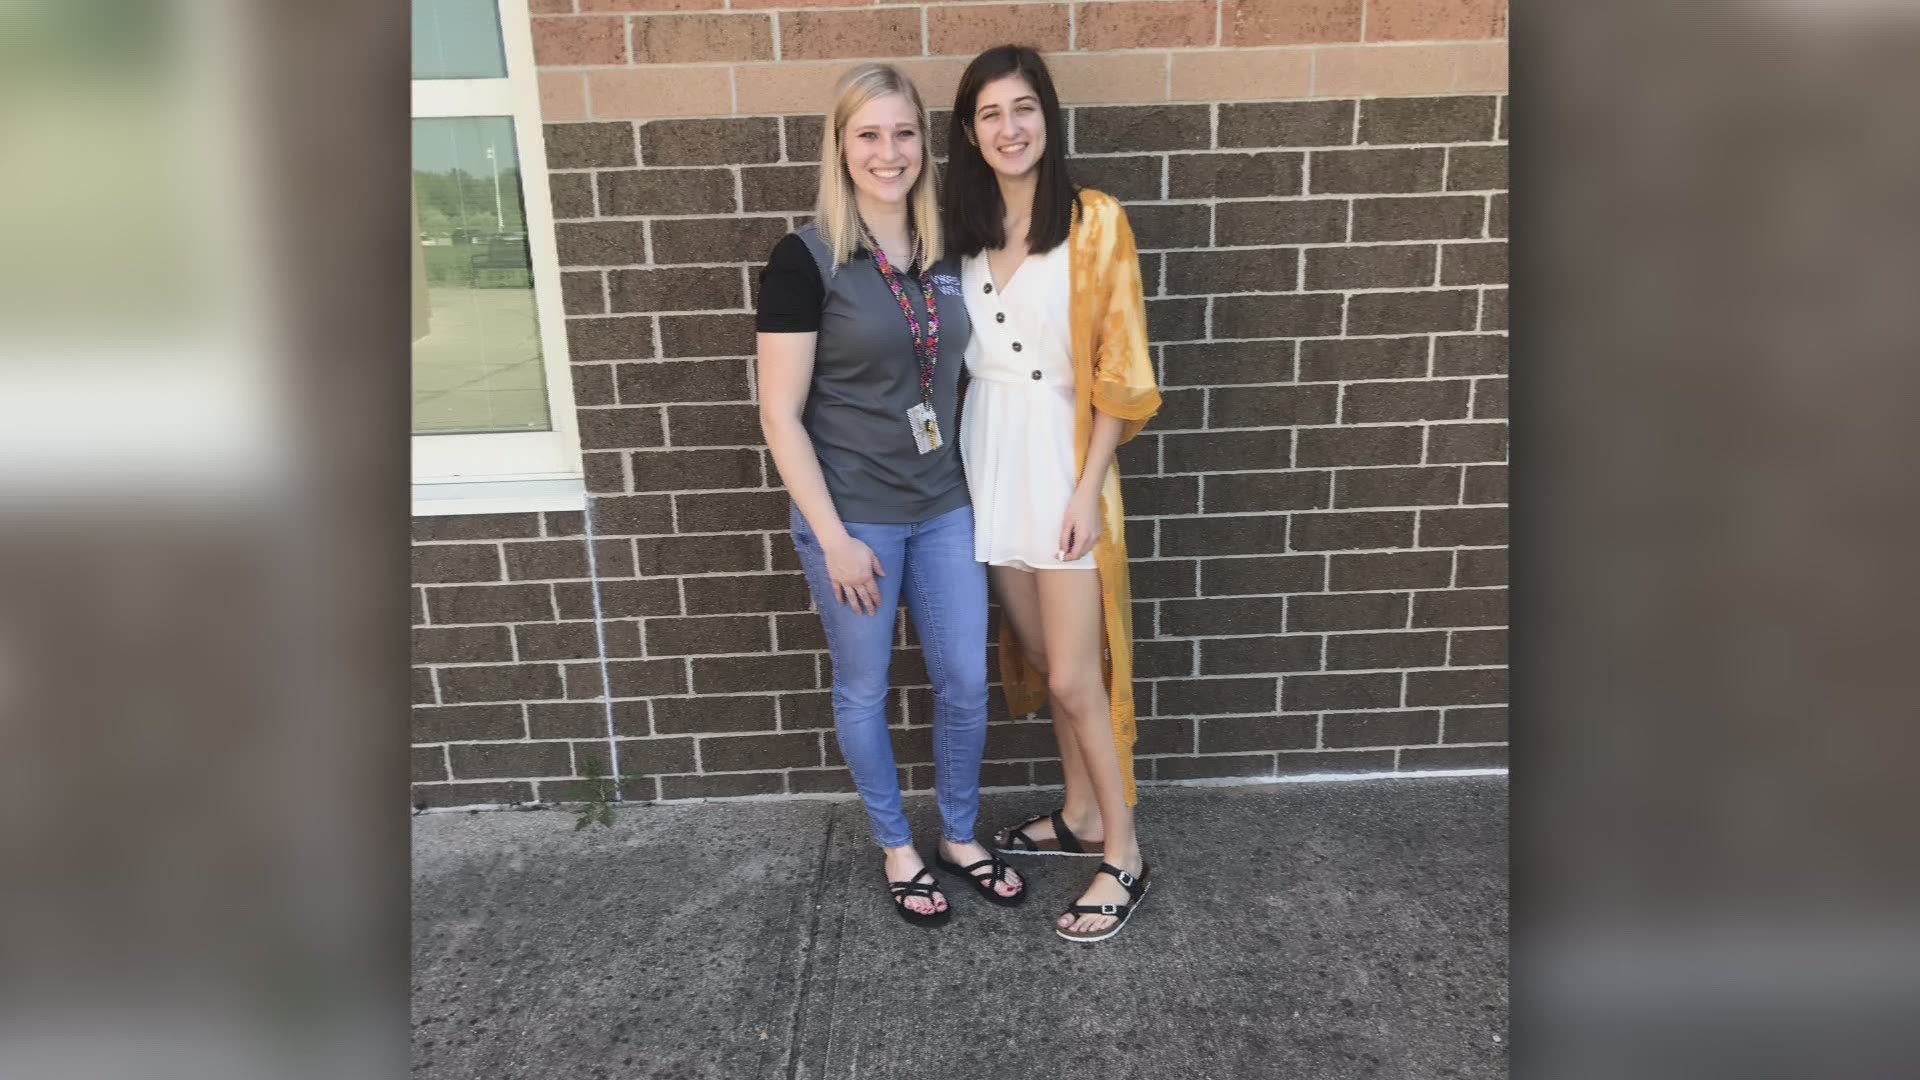 The biology teacher and volleyball coach was nominated by a viewer who says Westerman is incredibly caring and consistently goes above and beyond for her students.